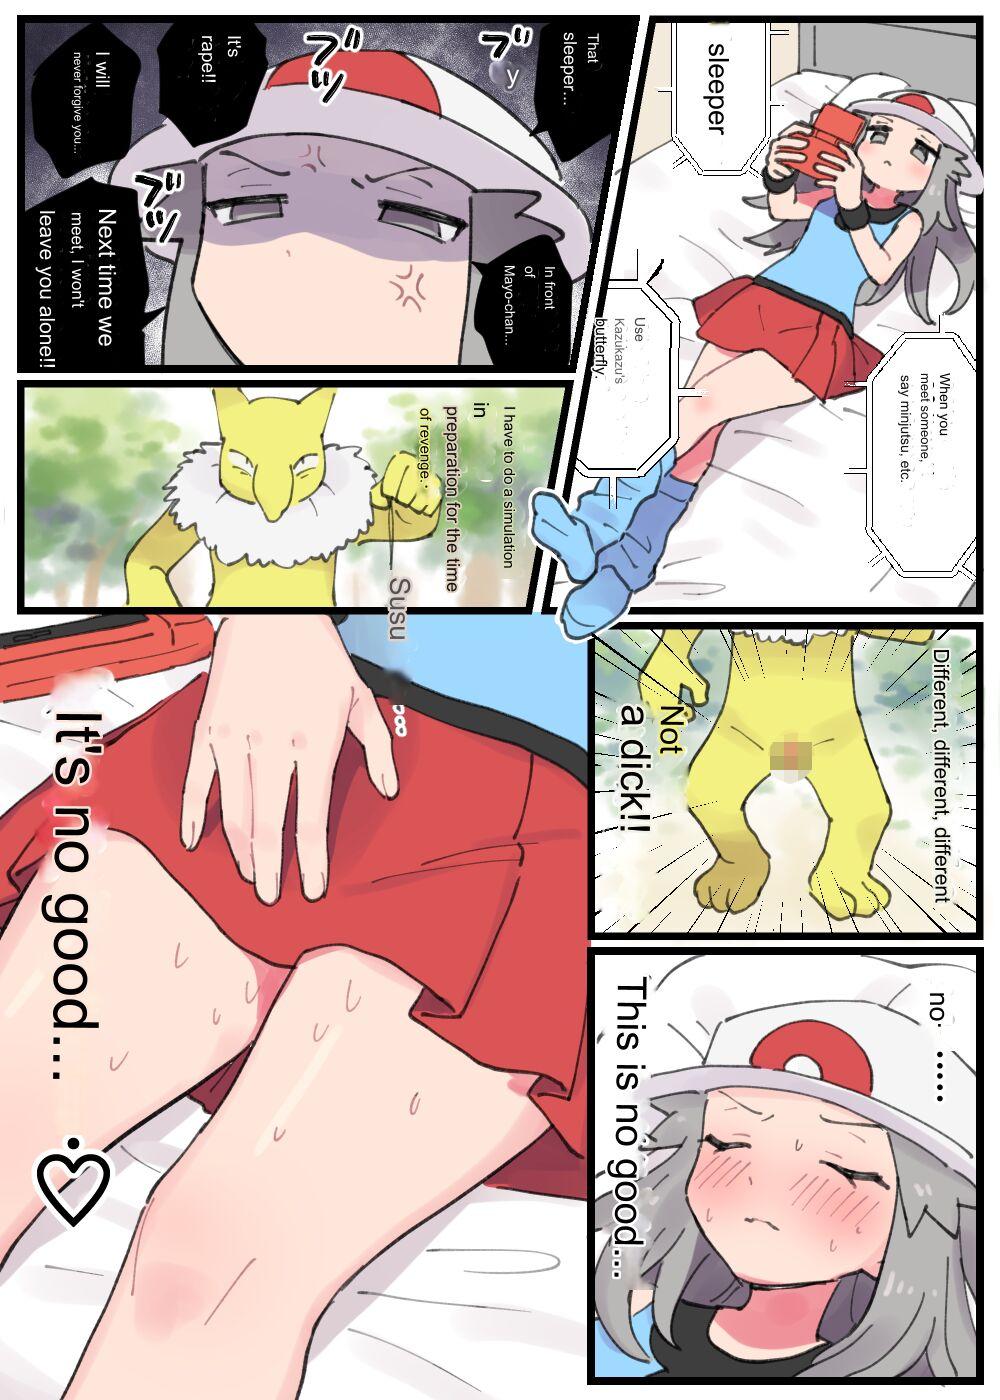 Hardcore Fucking Leaf goes to help Mayo-chan and gets hypnotically raped by Hypno - Pokemon | pocket monsters Japan - Page 8